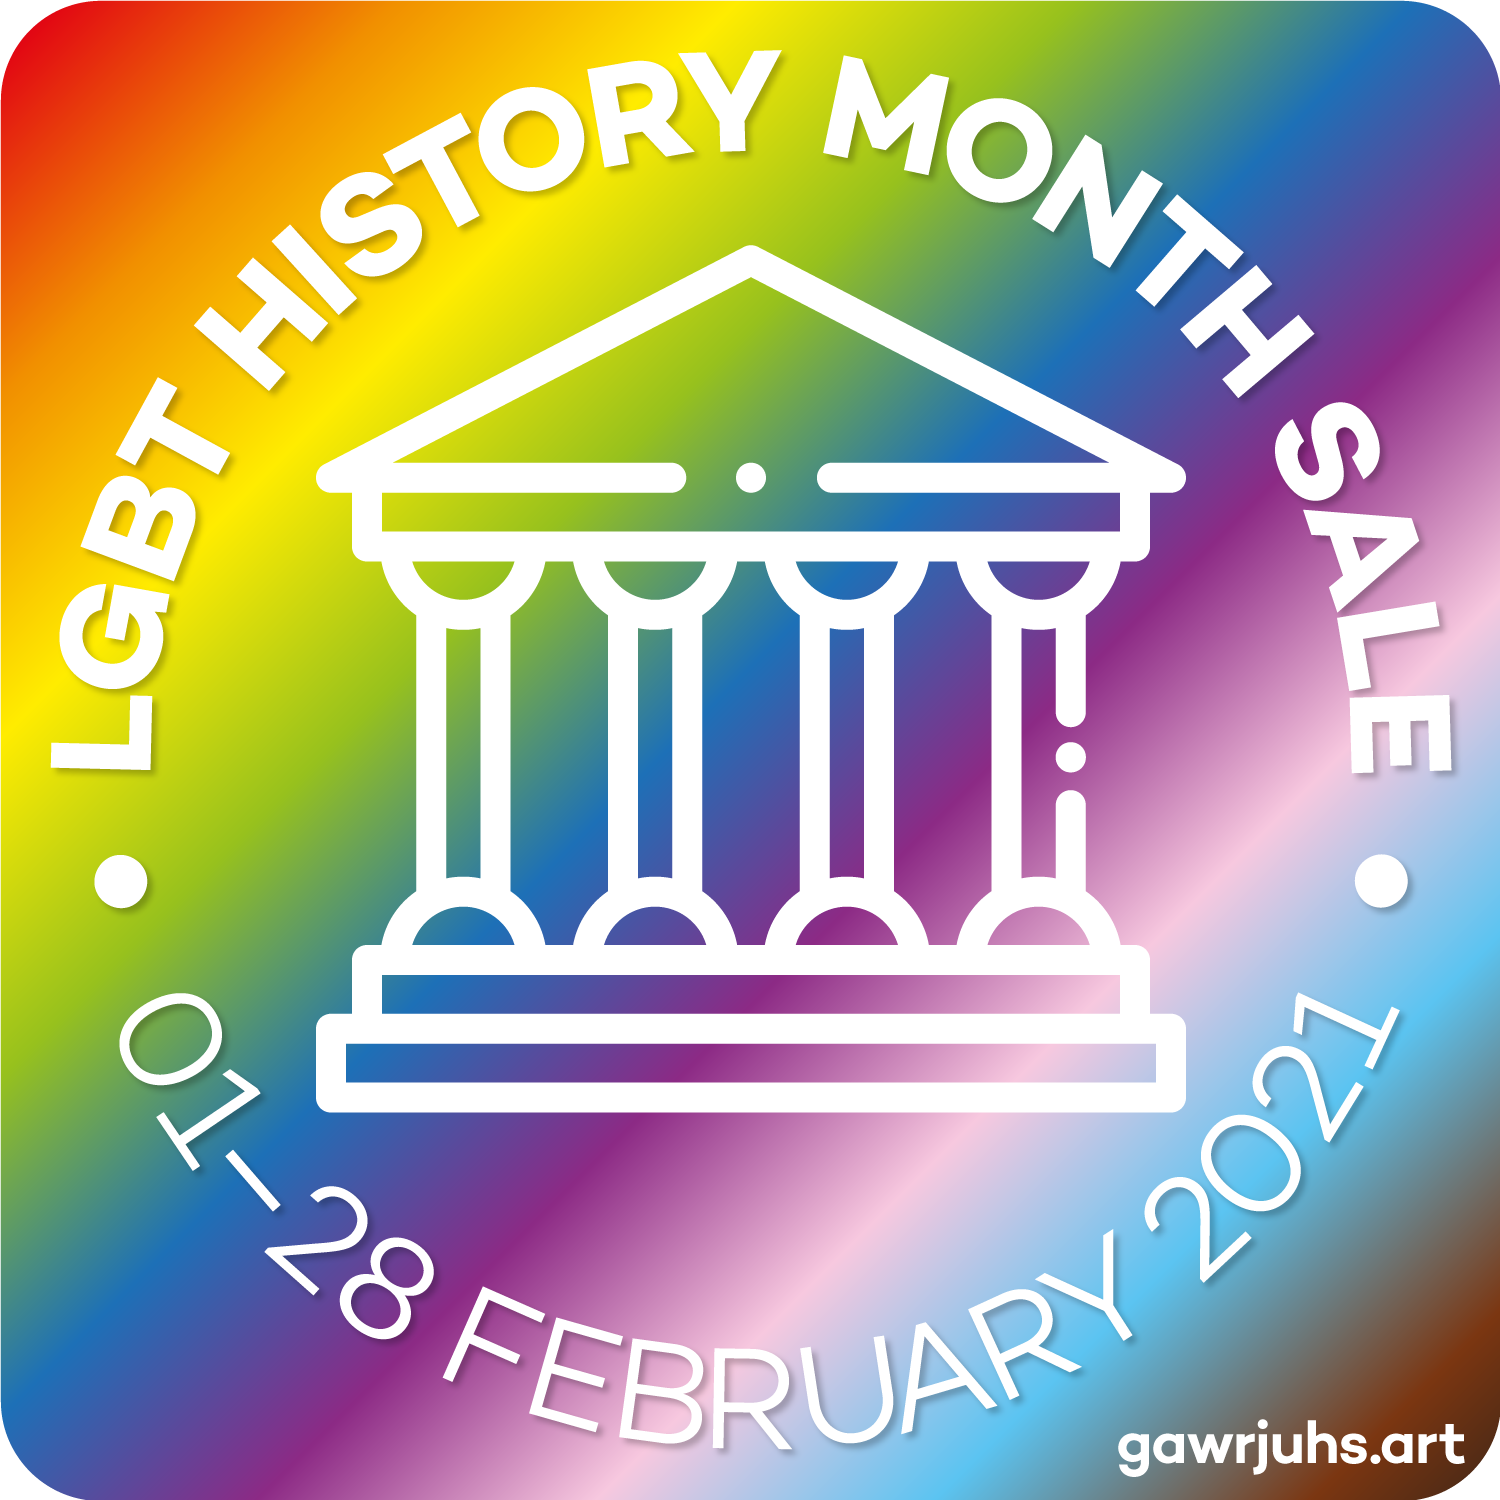 lgbt-history-month-sale-temple-icon